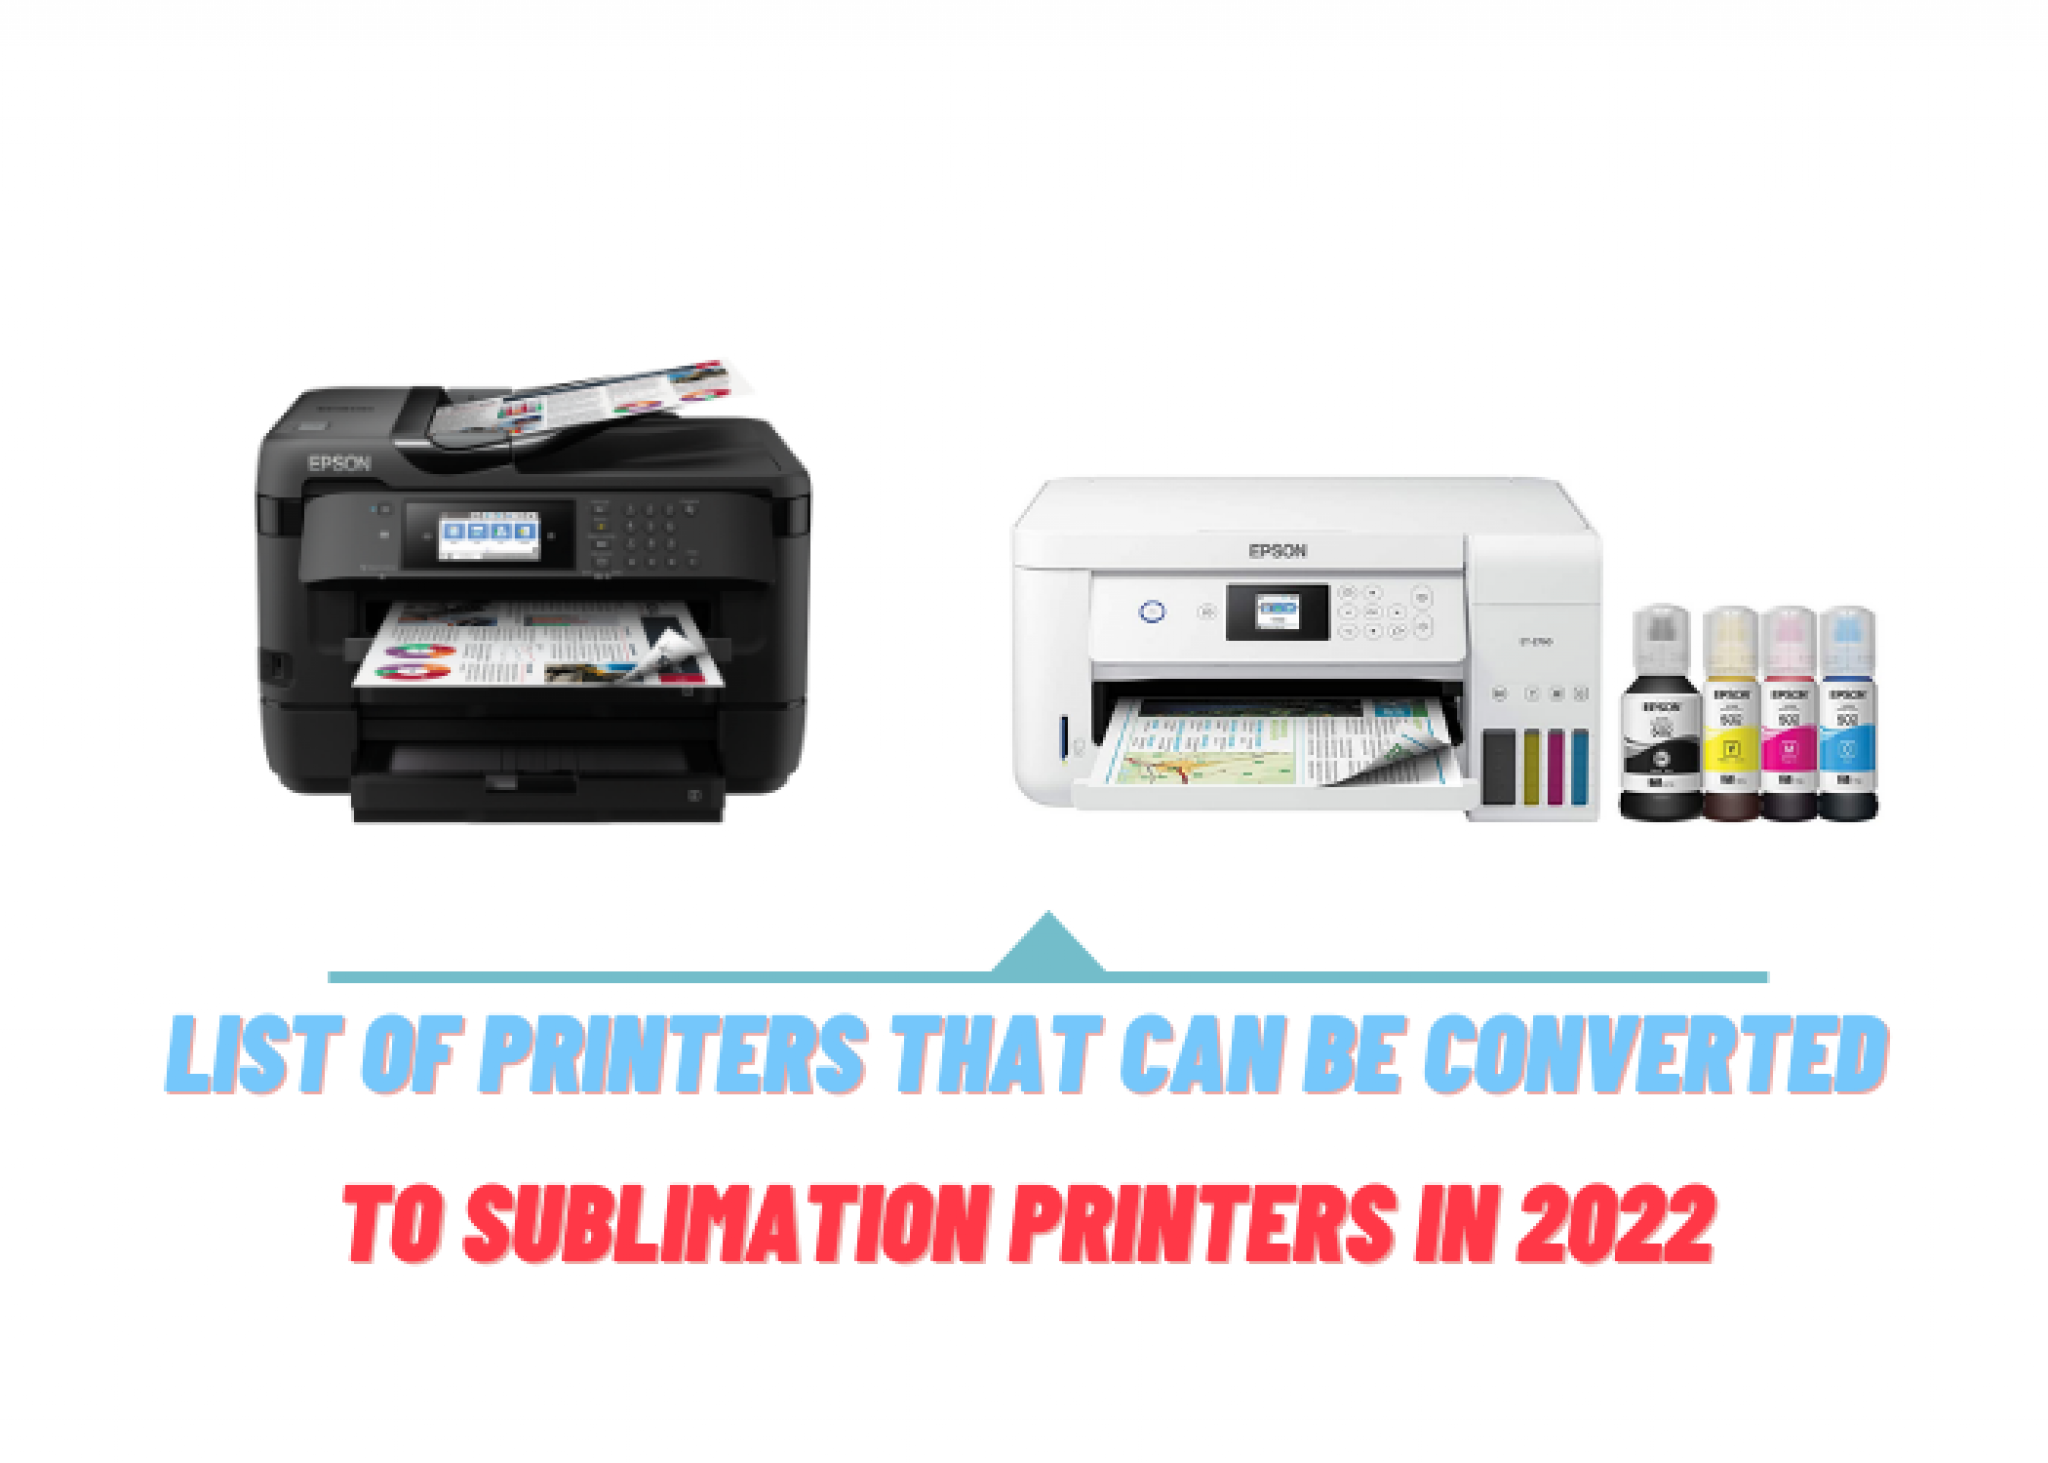 list-of-printers-that-can-be-converted-to-sublimation-printers-in-2022